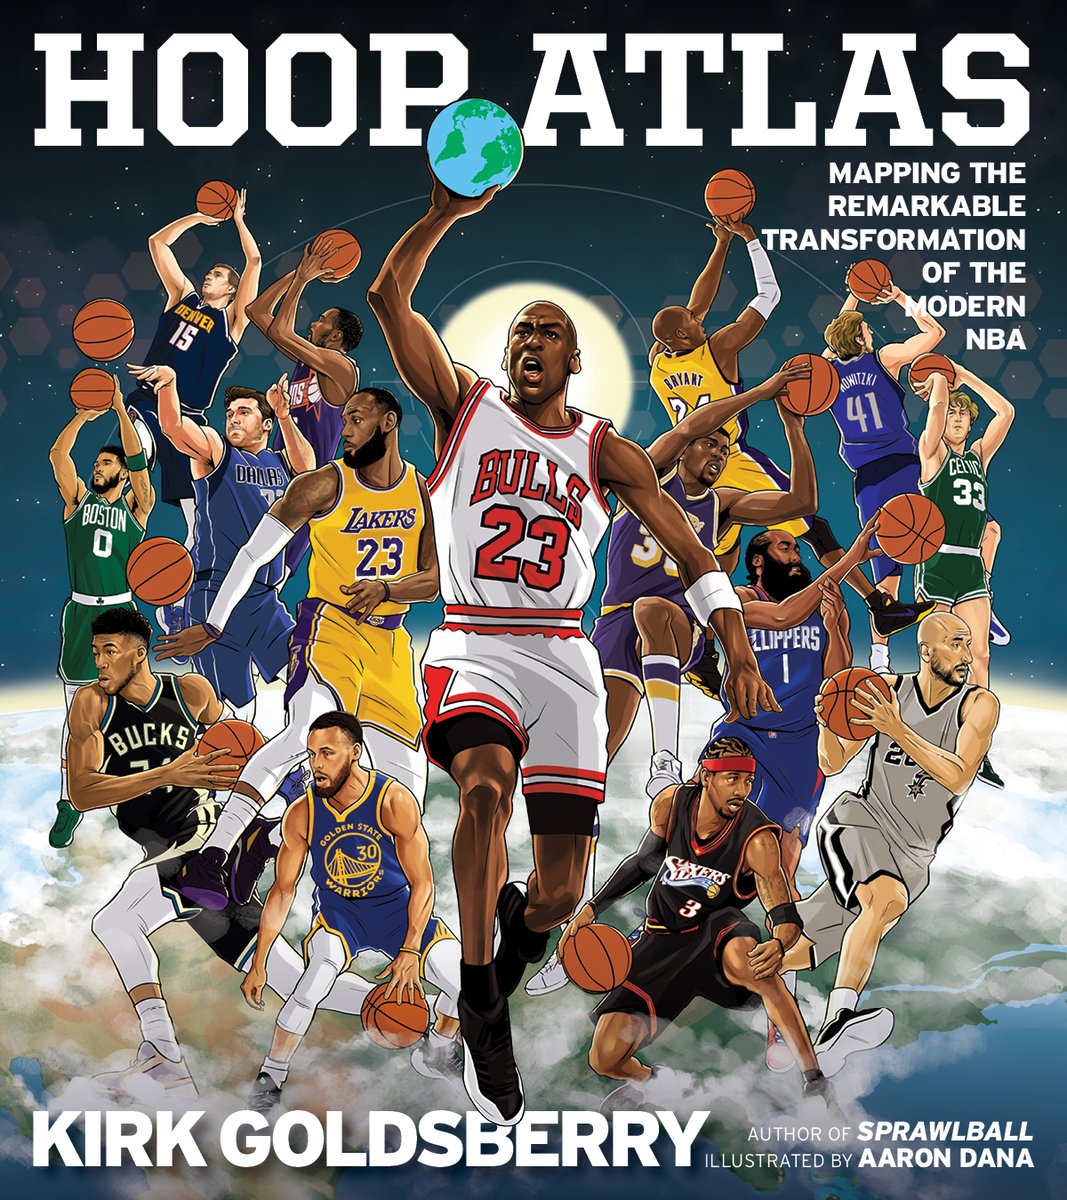 Hoop Atlas Is Out Today! One of my favorite chapters is about Stephen Curry, and how he blended innovative workouts and technology to build the best jump-shooting arsenal in NBA history - and changed the game forever. amazon.com/Hoop-Atlas-Map…